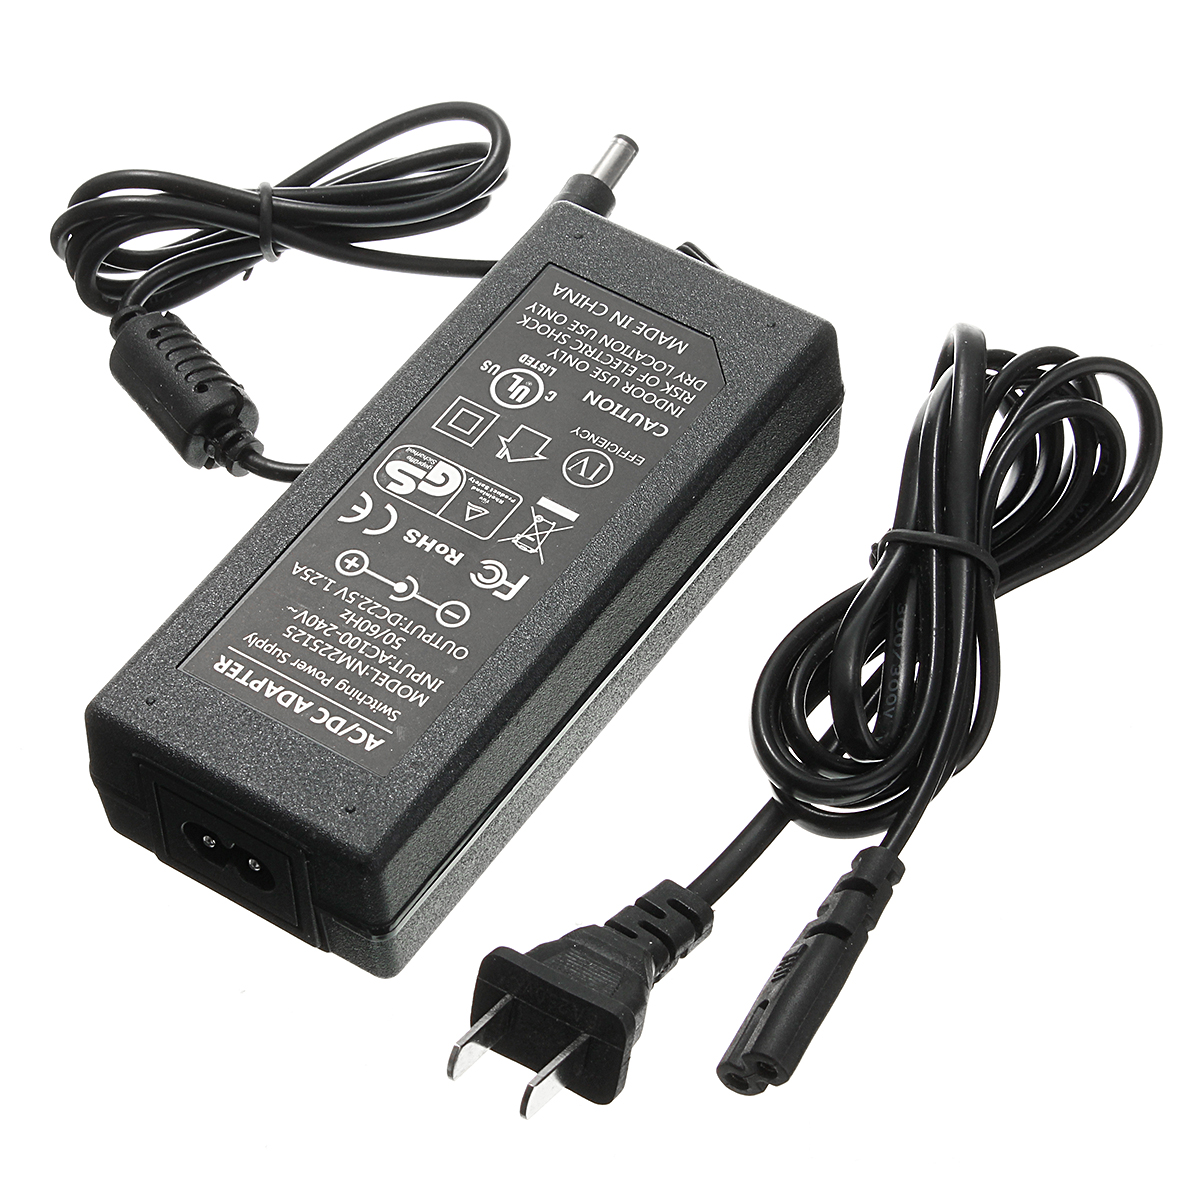 30W-225V-125A-Power-Supply-ACDC-Charger-Adapter-Cord-Cable-Charger-For-400-500-600-1363216-4